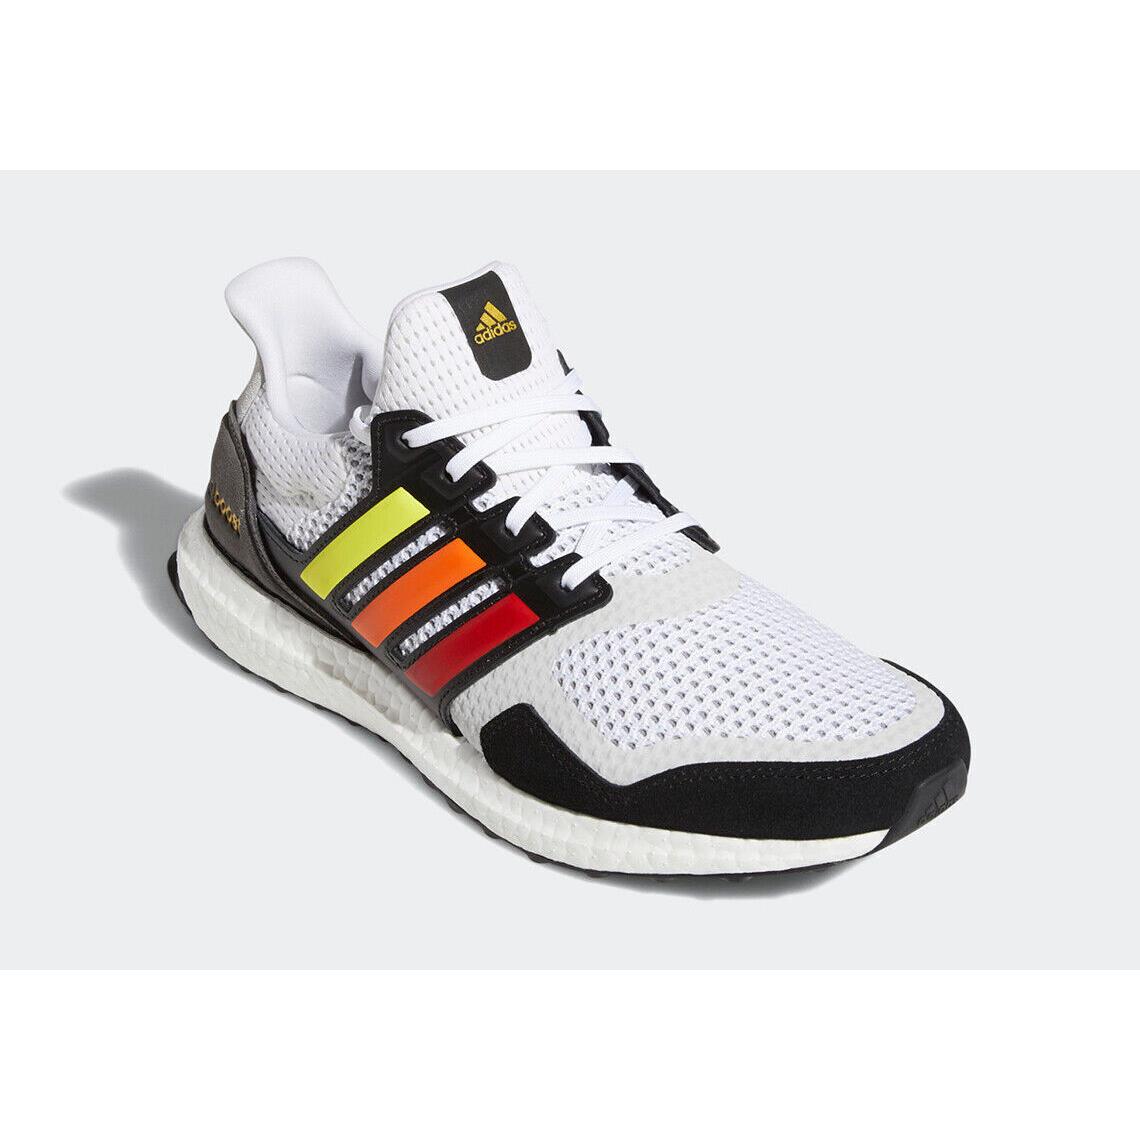 Adidas Ultraboost Men`s FY5347 Ultraboost S L Pride Running White Shoes Sneakers | 692740400044 - Adidas shoes UltraBoost WHITE/BLACK/RED/YELLOW/ORANGE & GREY | SporTipTop